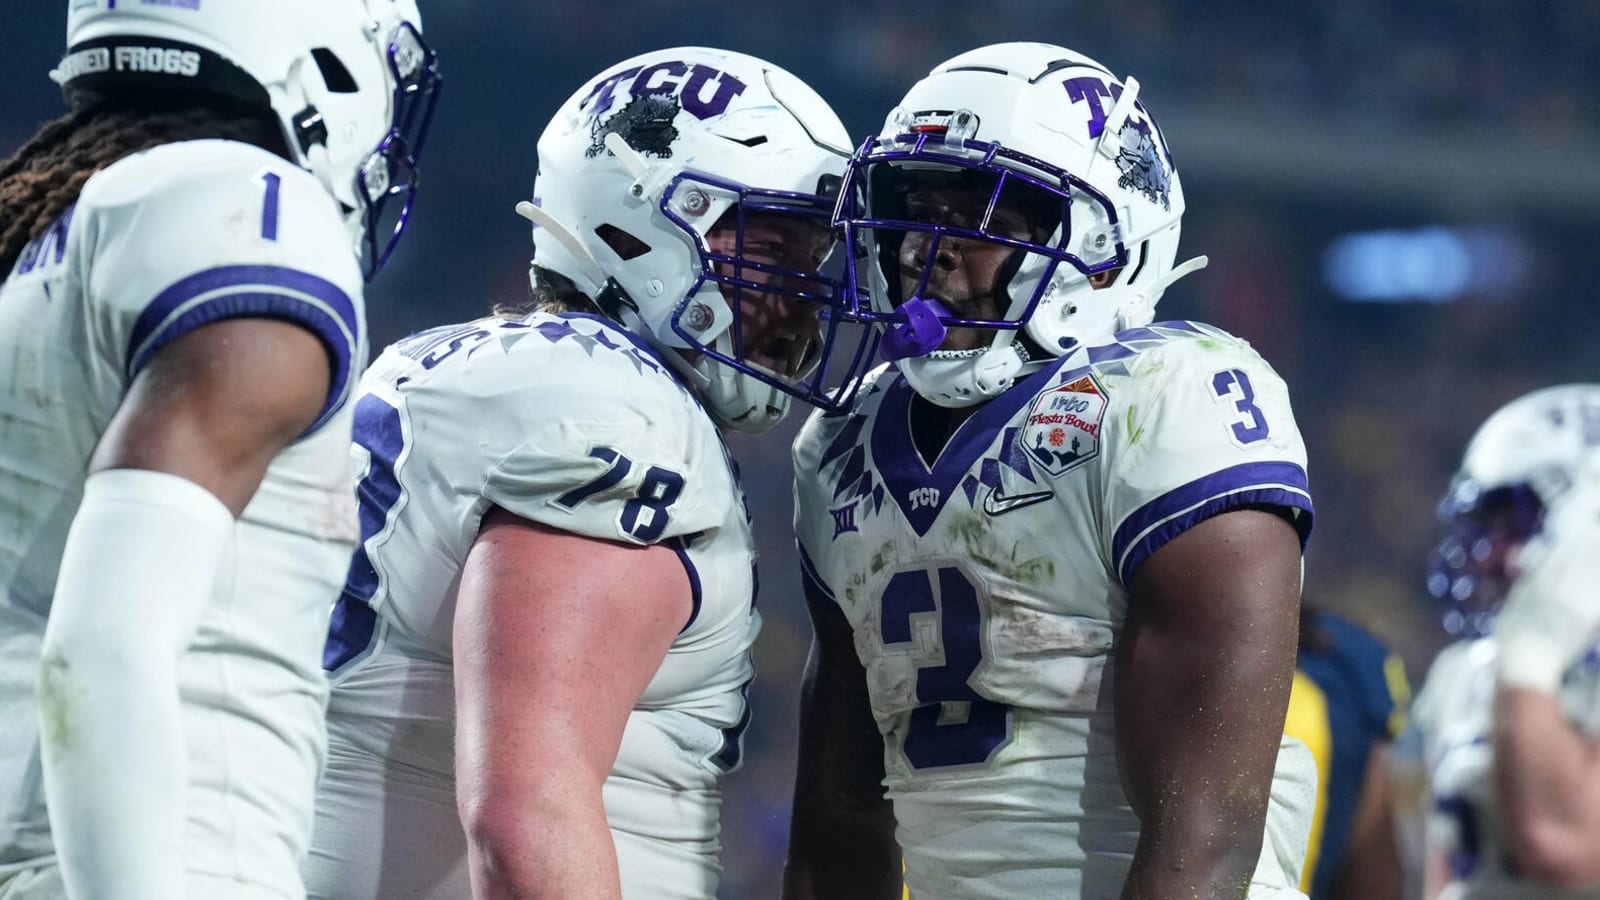 TCU upsets Michigan 51-45 in semifinal to head to title game